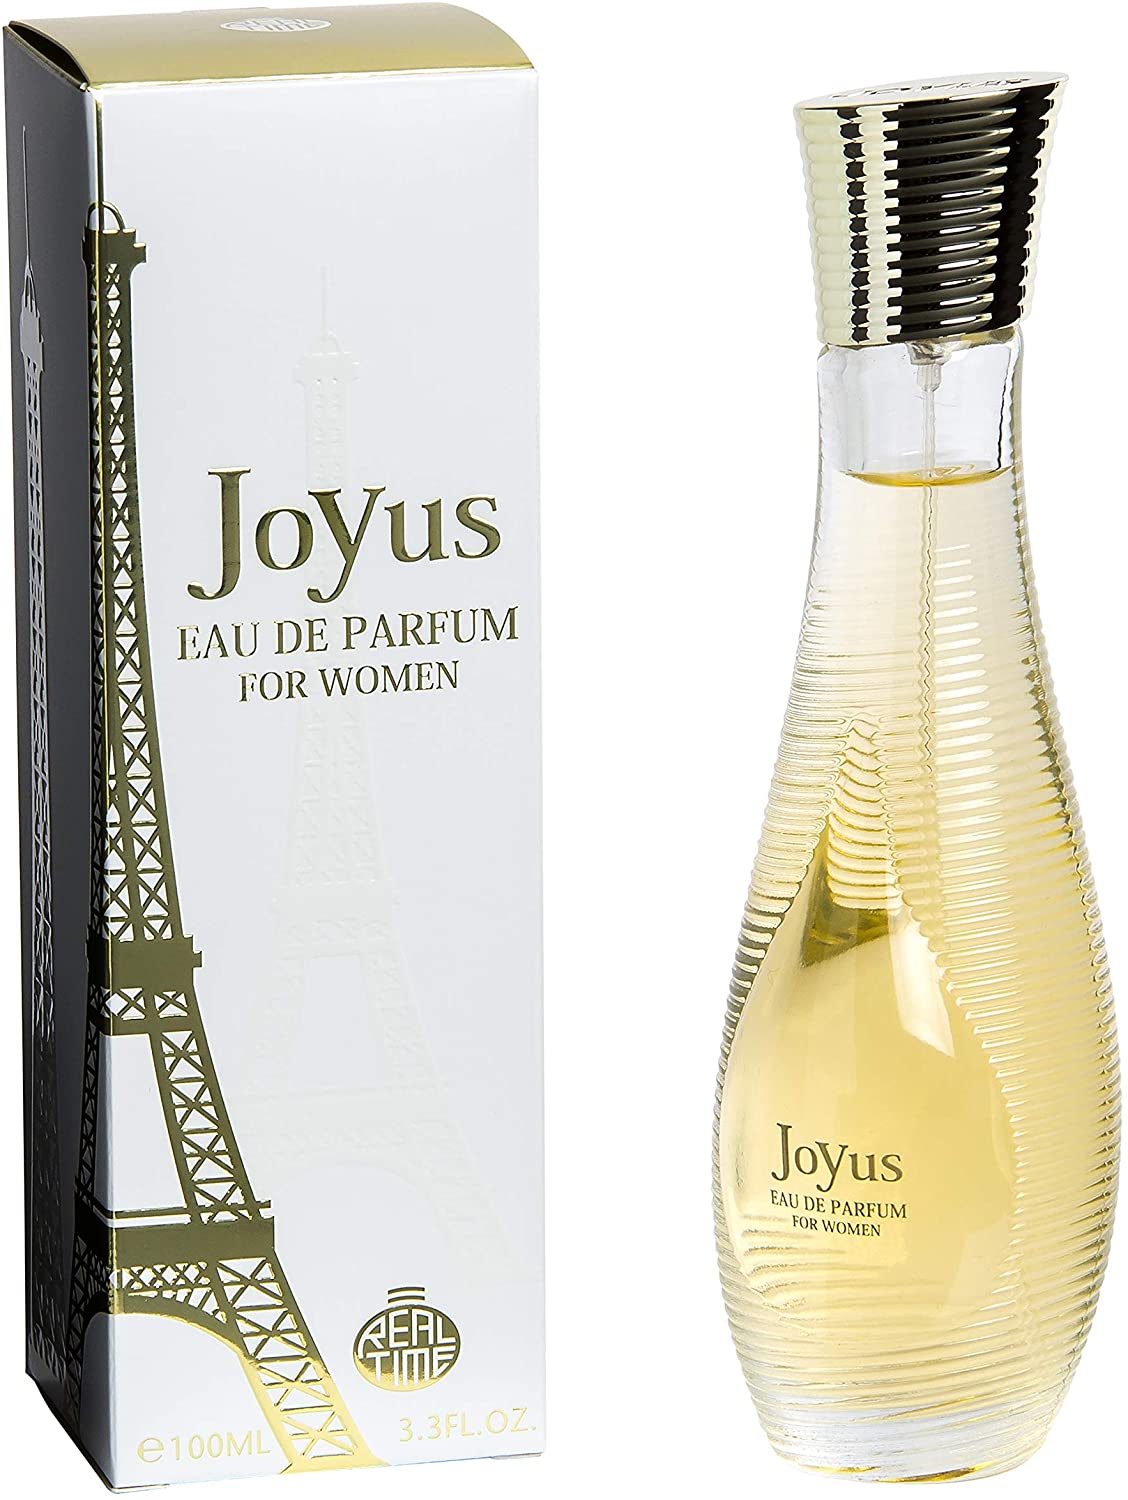 Joyus is Inspired by DIor, J'adore